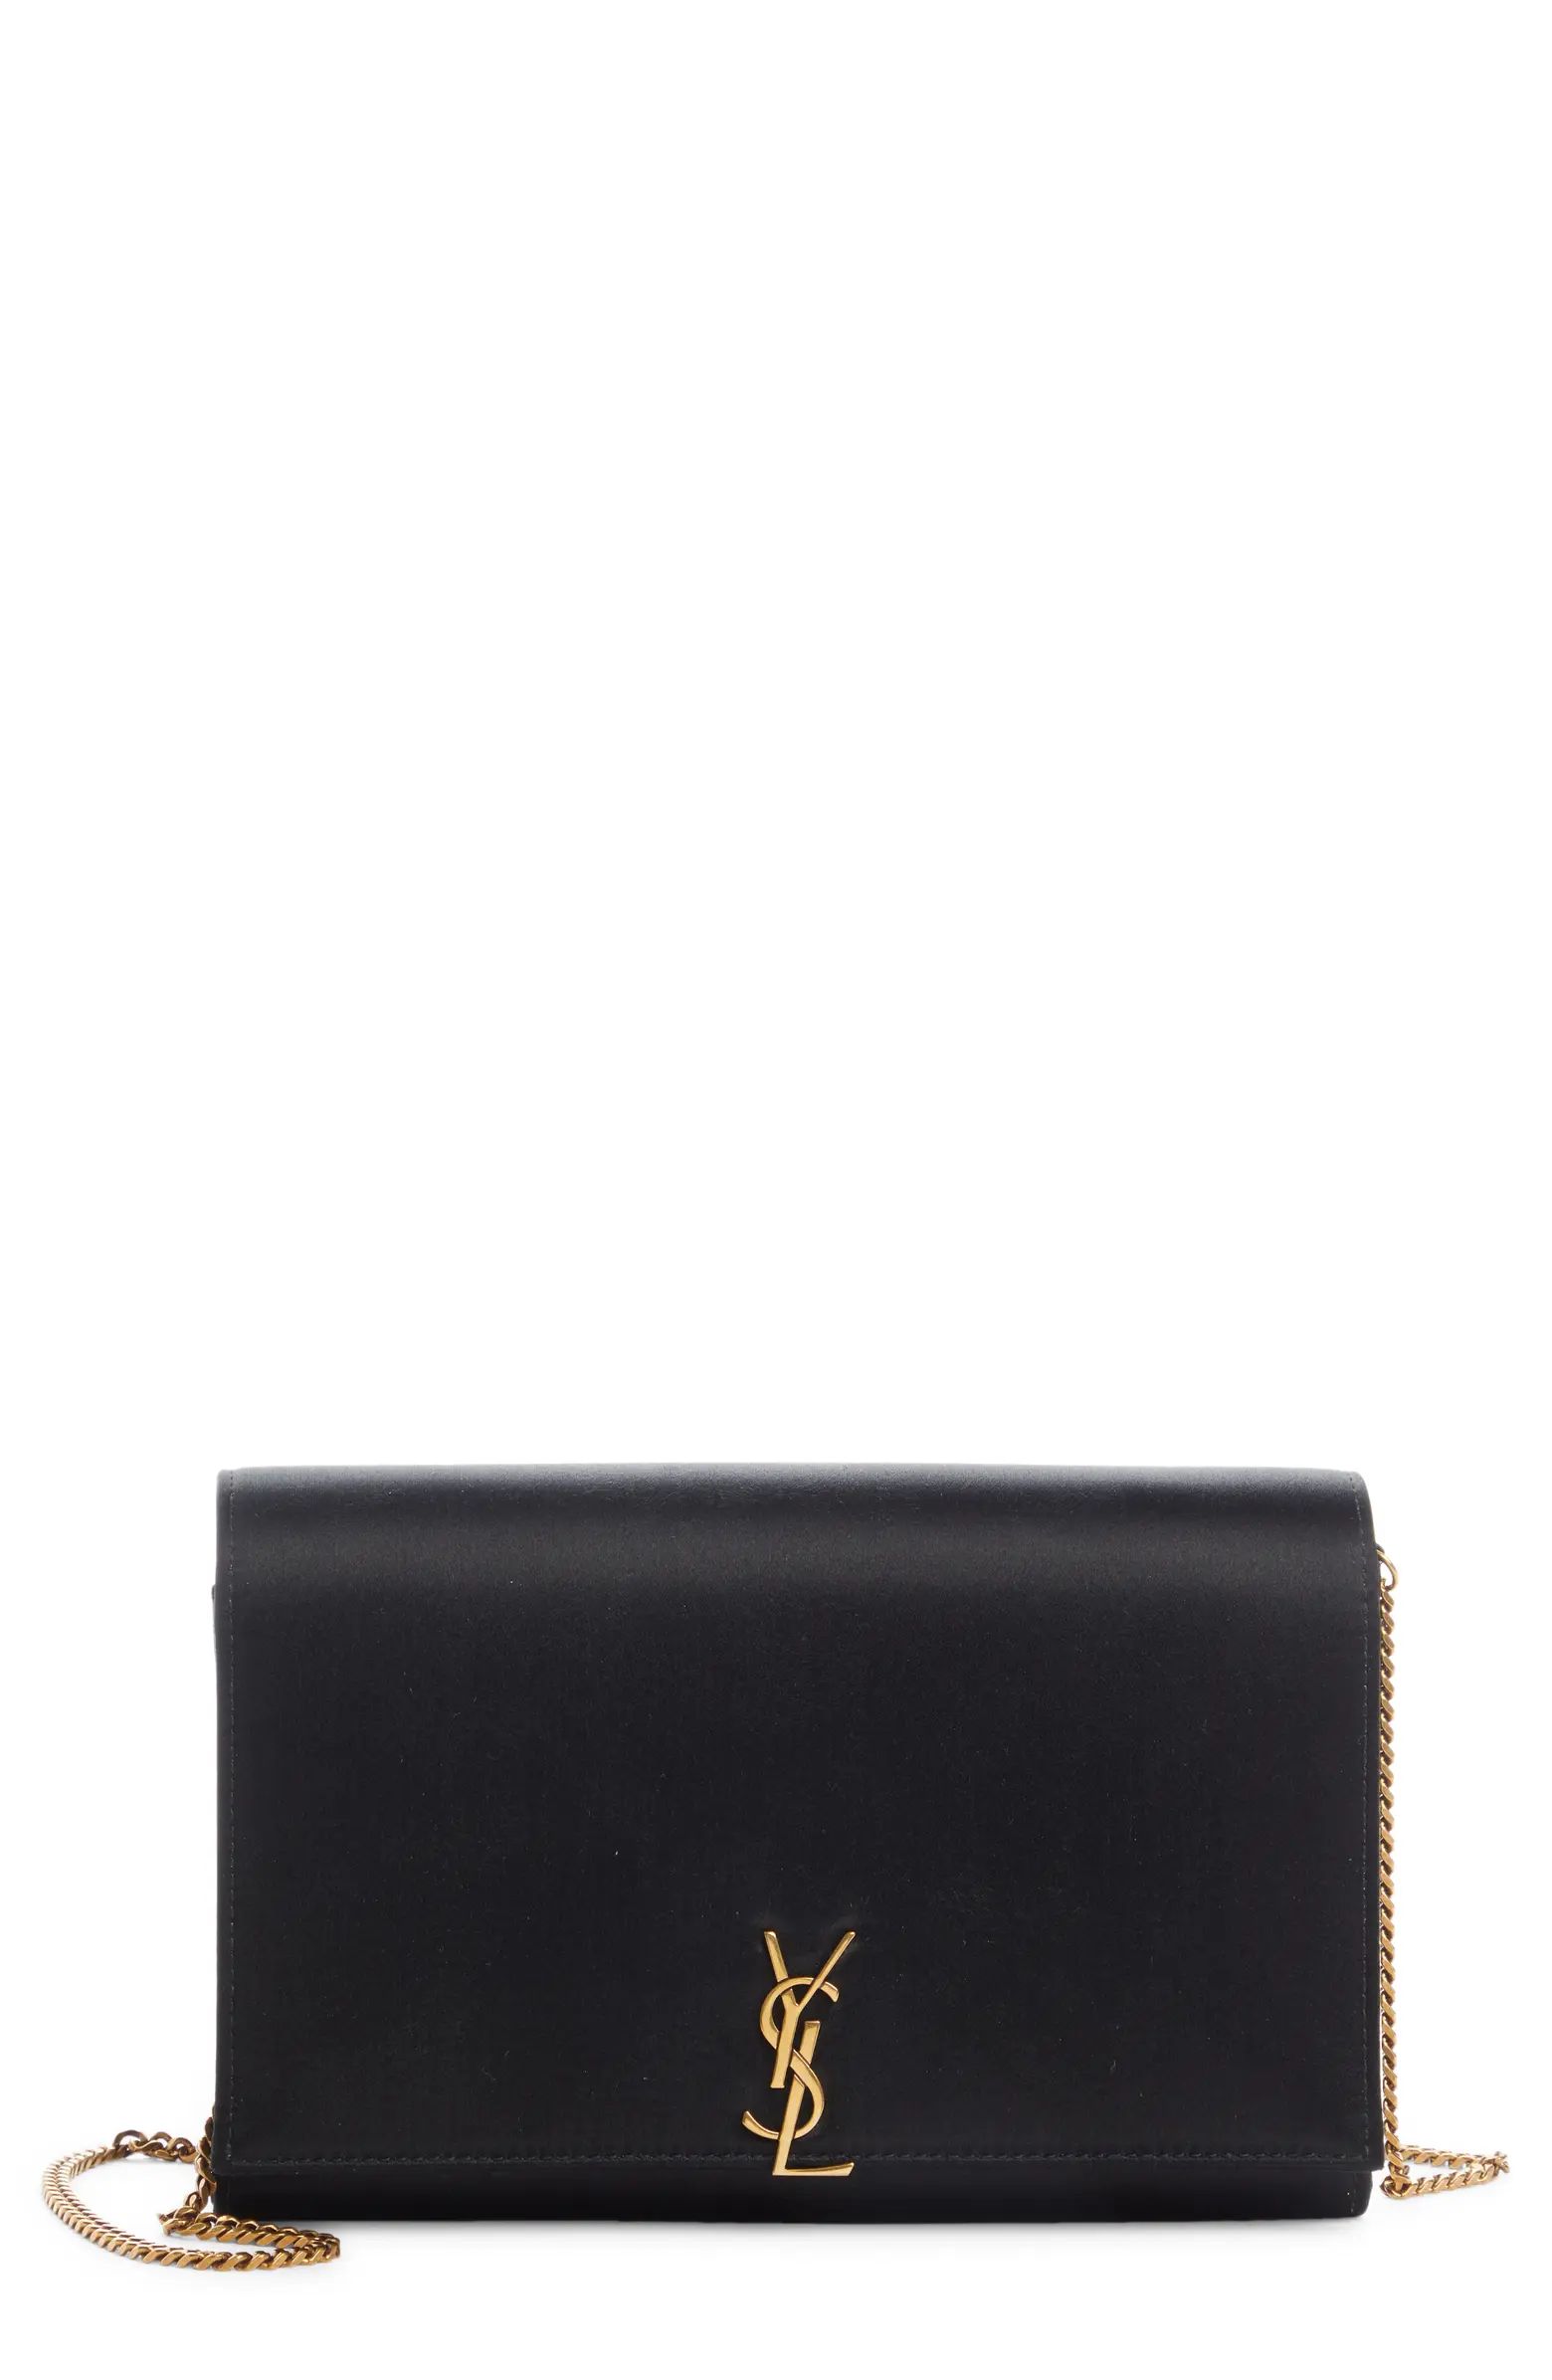 Saint Laurent Glossy Leather Wallet on a Chain | Nordstrom | Nordstrom